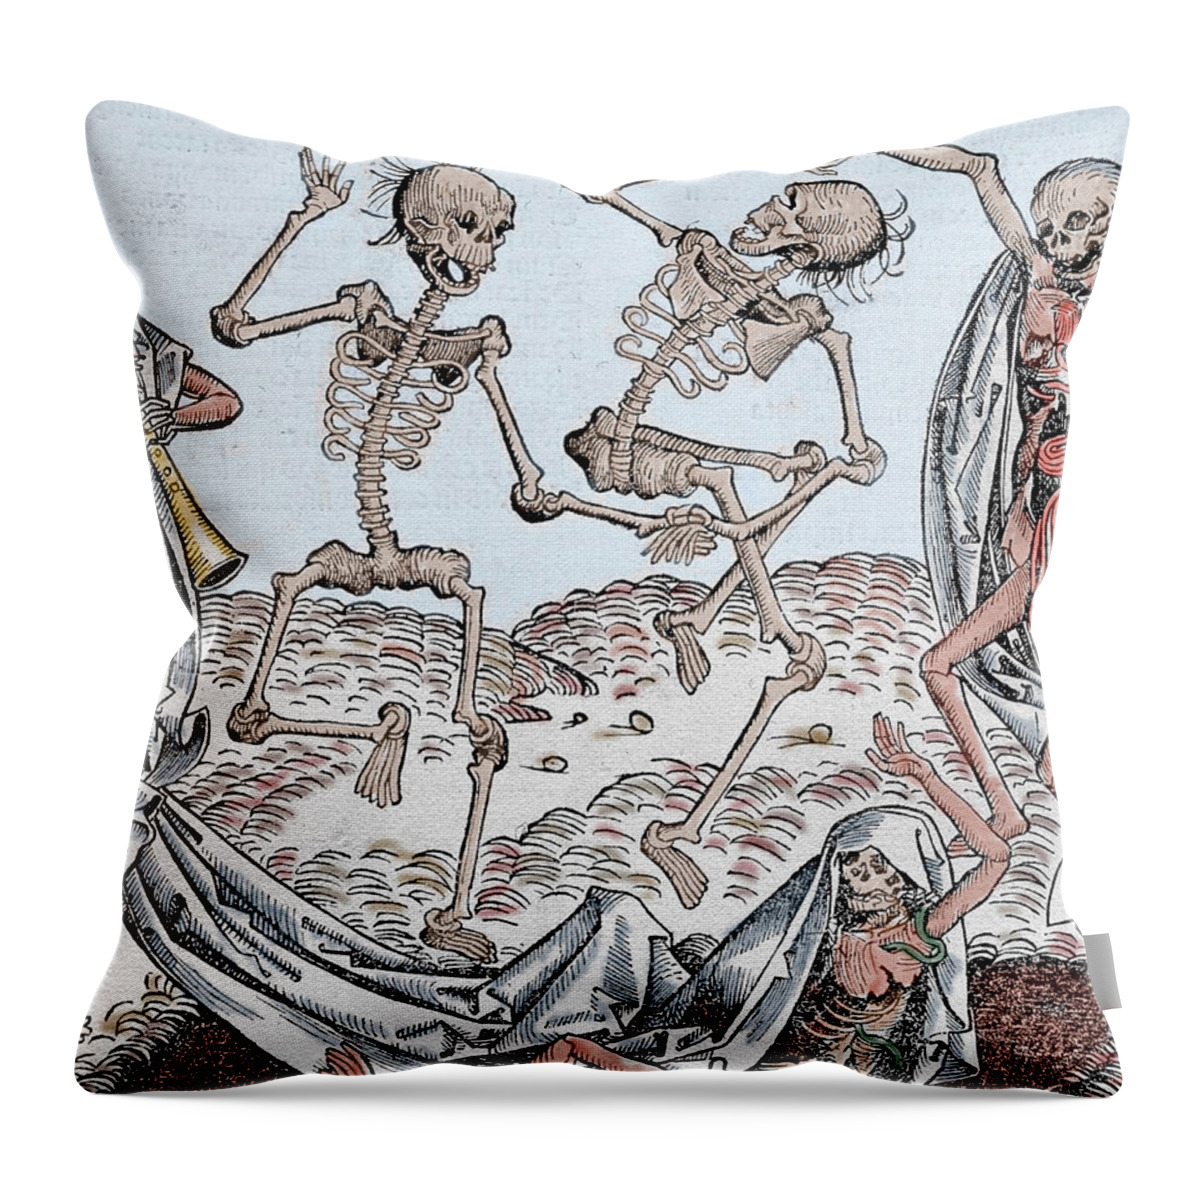 The Dance Of Death Throw Pillow featuring the drawing The Dance of Death by Michael Wolgemut